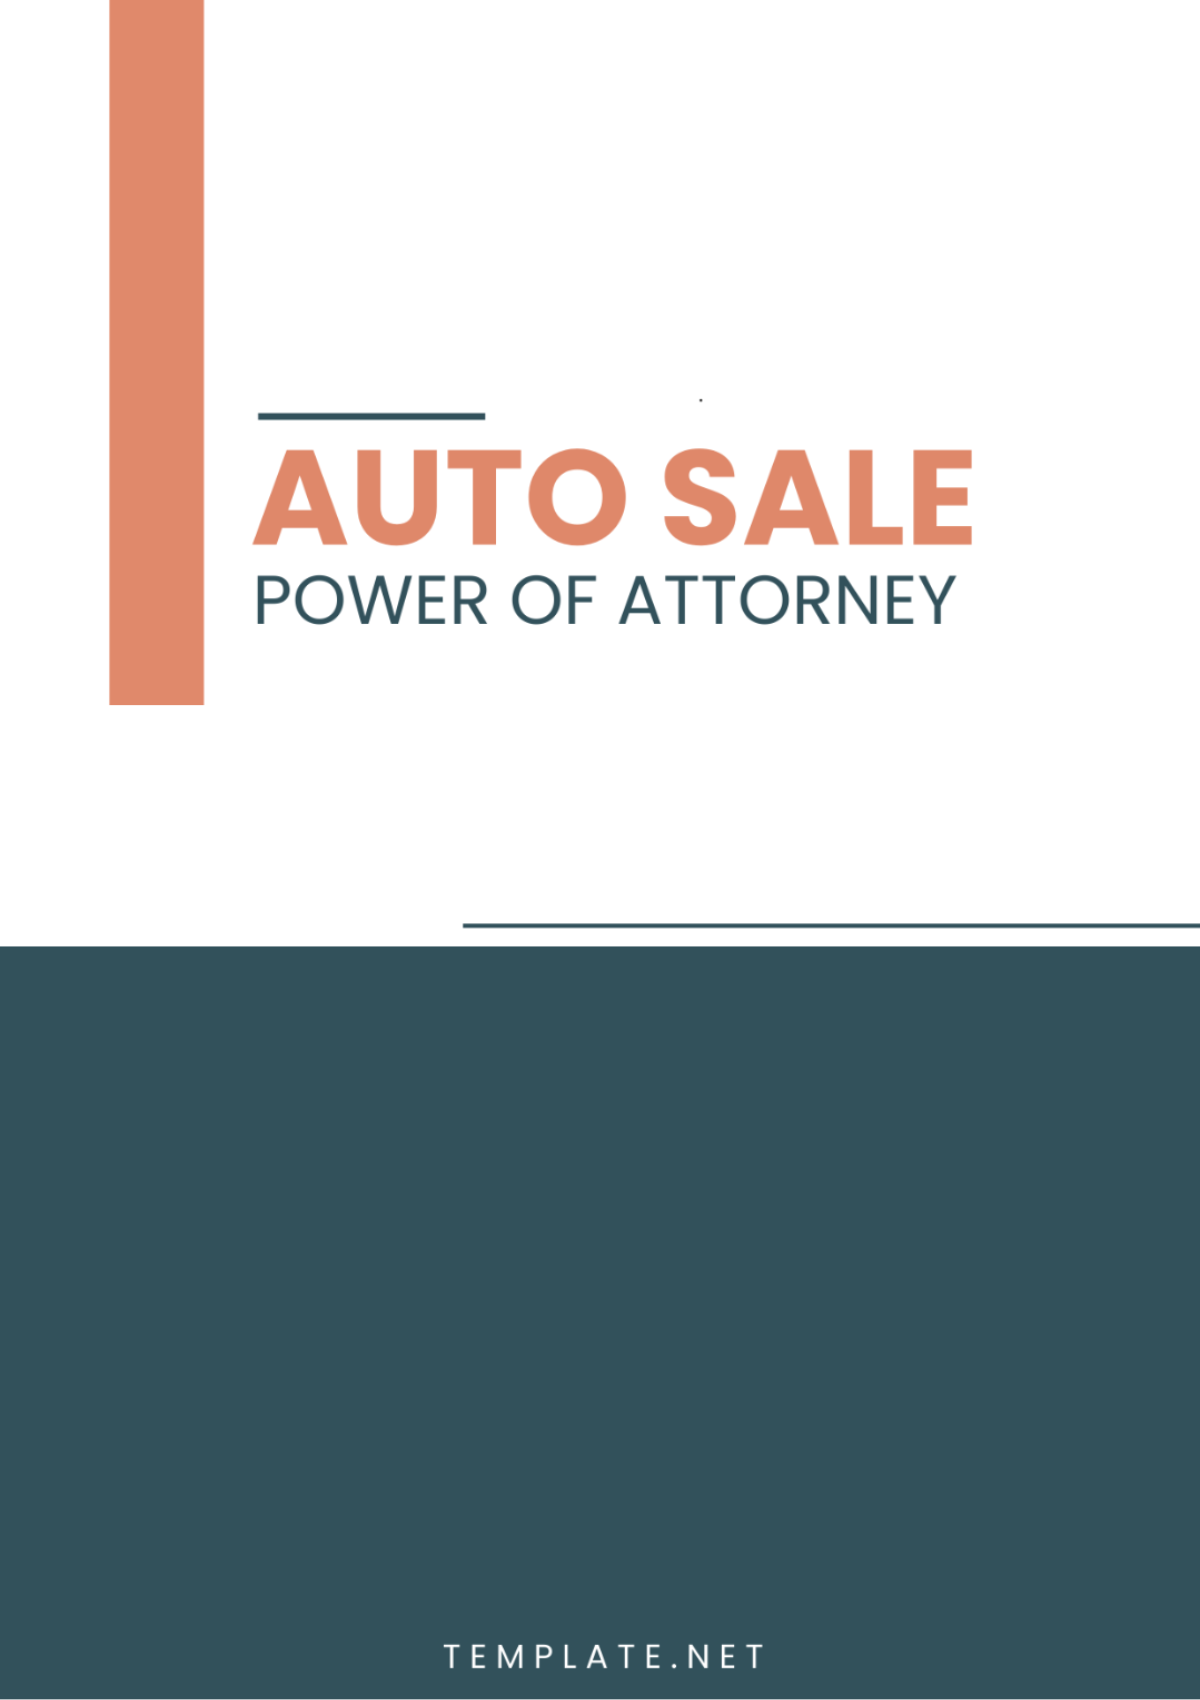 Auto Sale Power of Attorney Template